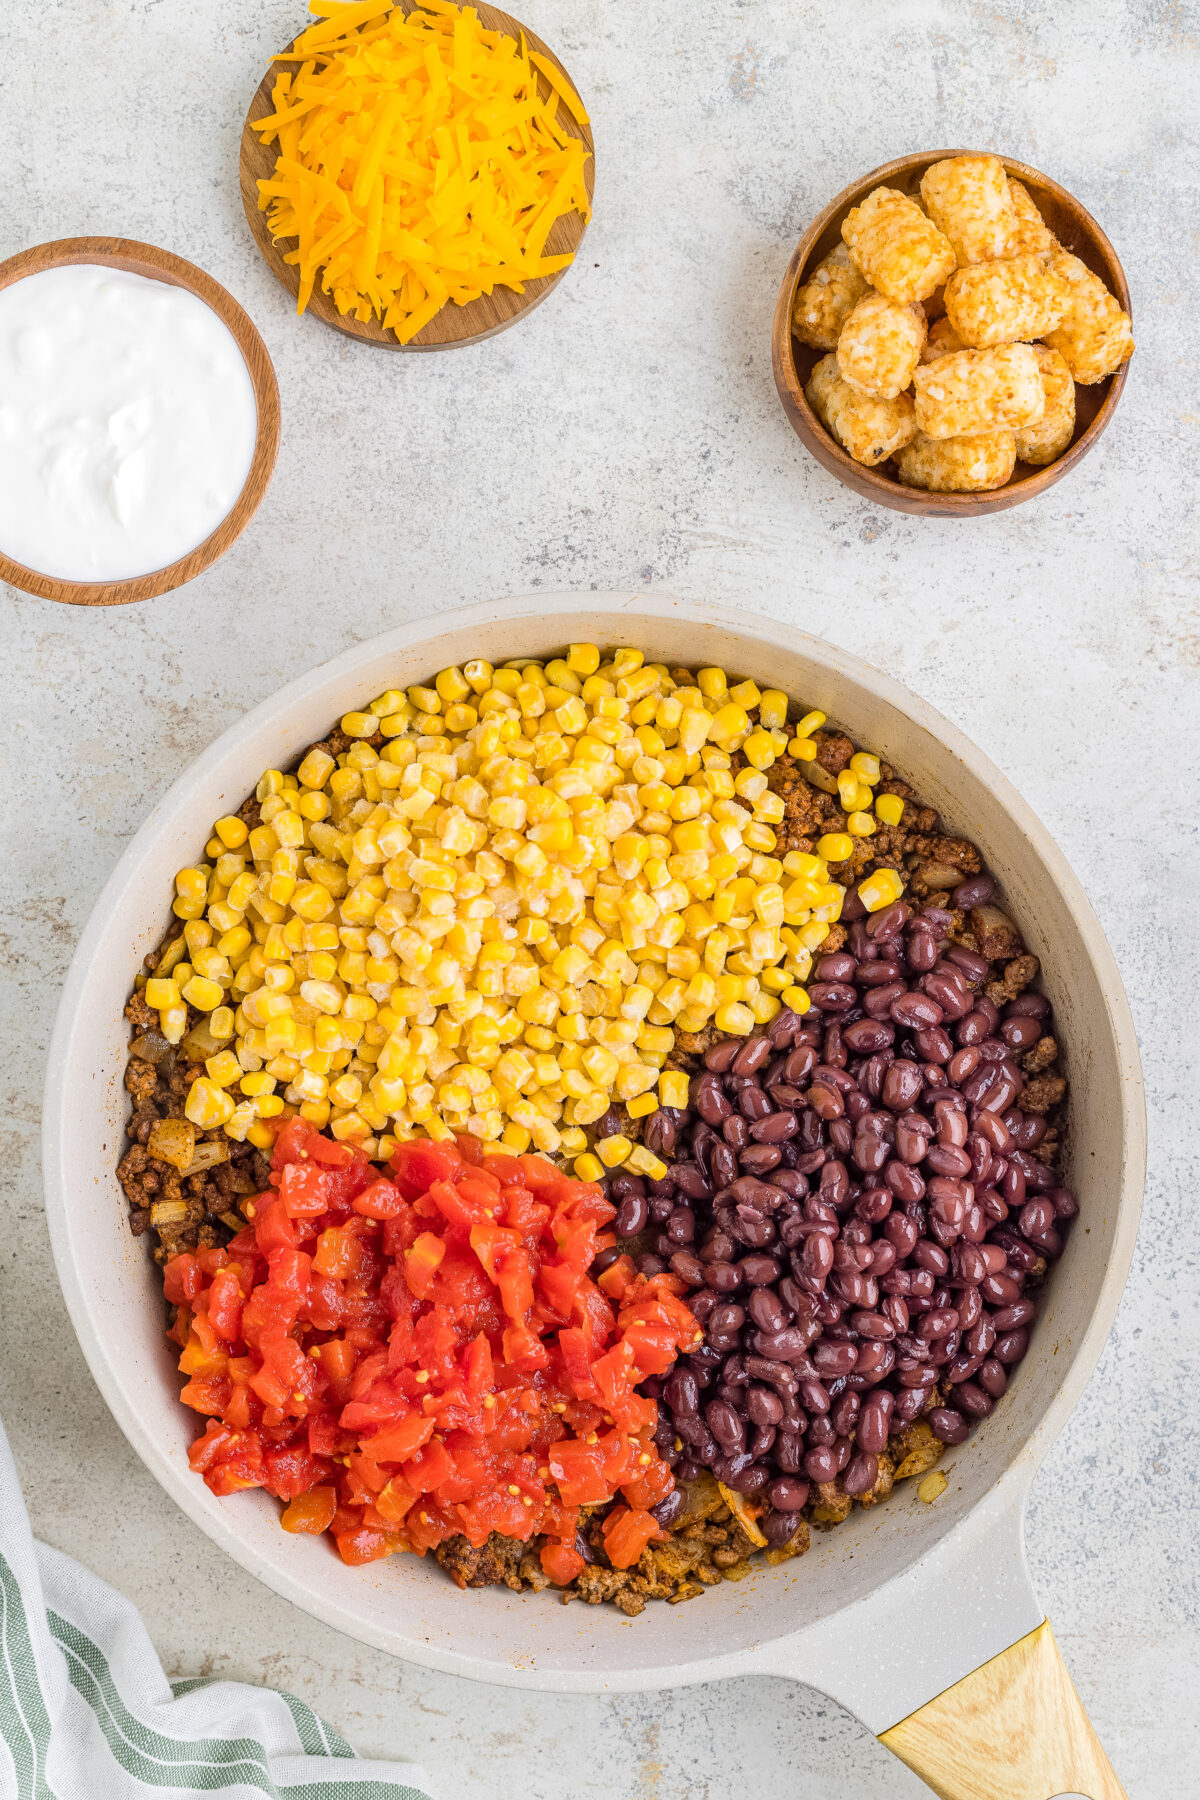 Corn, tomatoes, and beans added to the skillet.